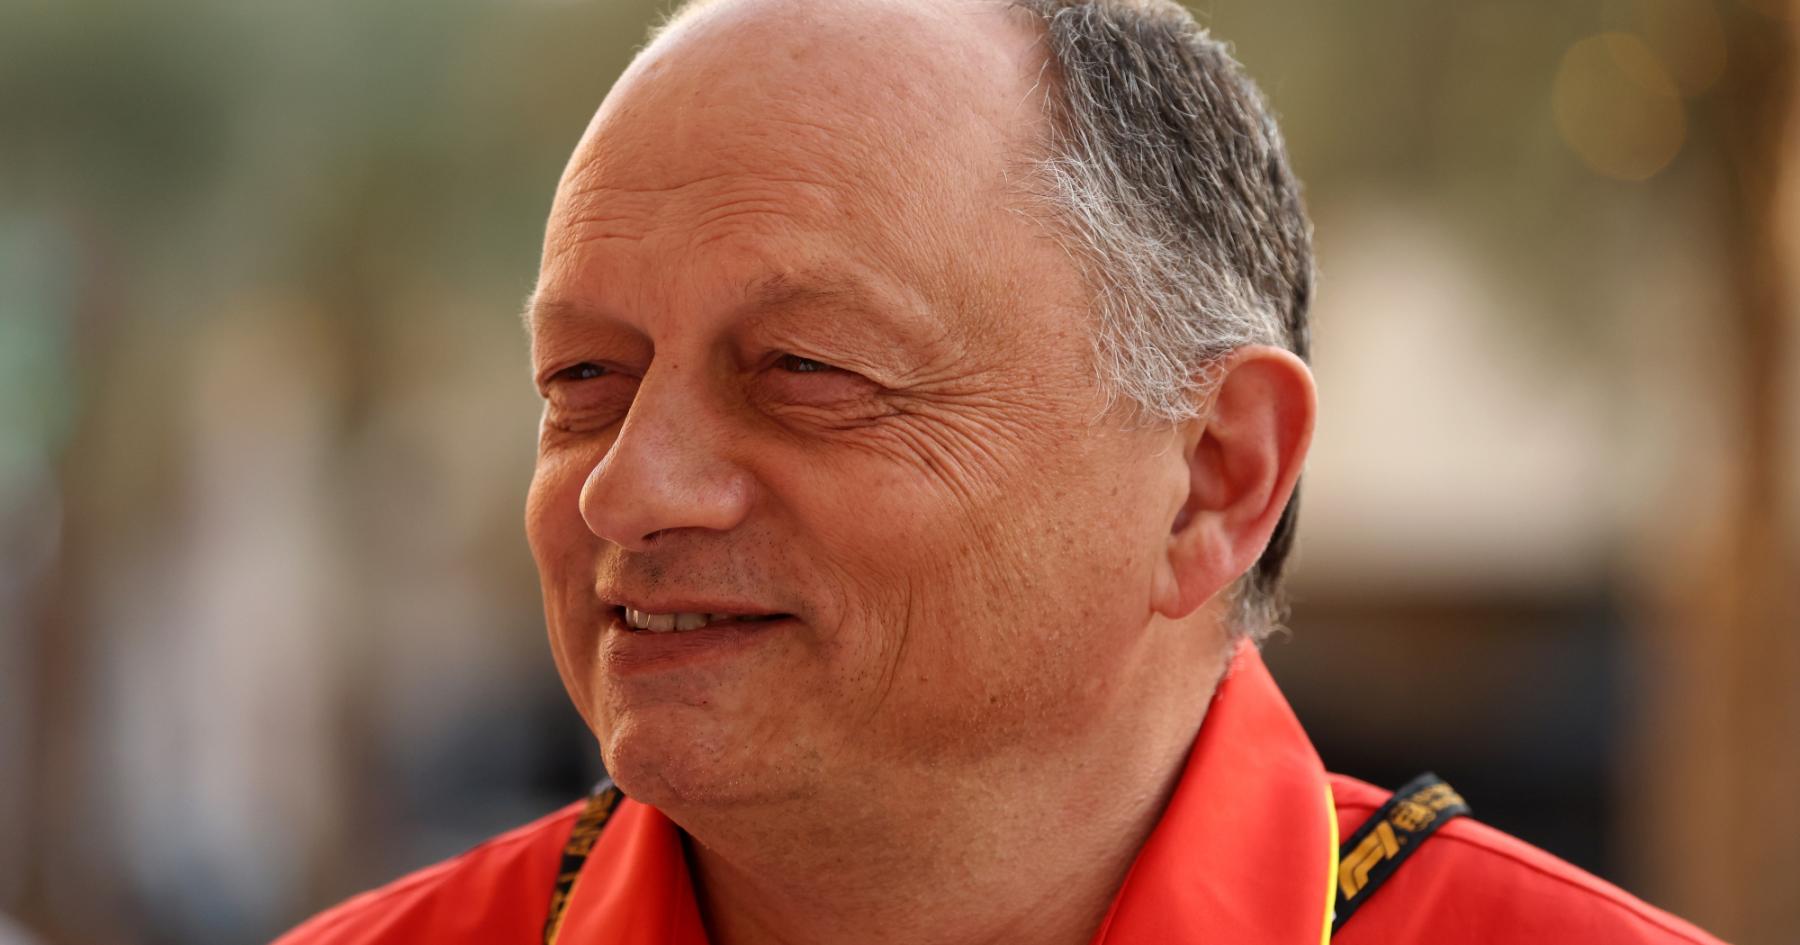 Vasseur's Definitive Declaration on the Red Bull F1 Controversy